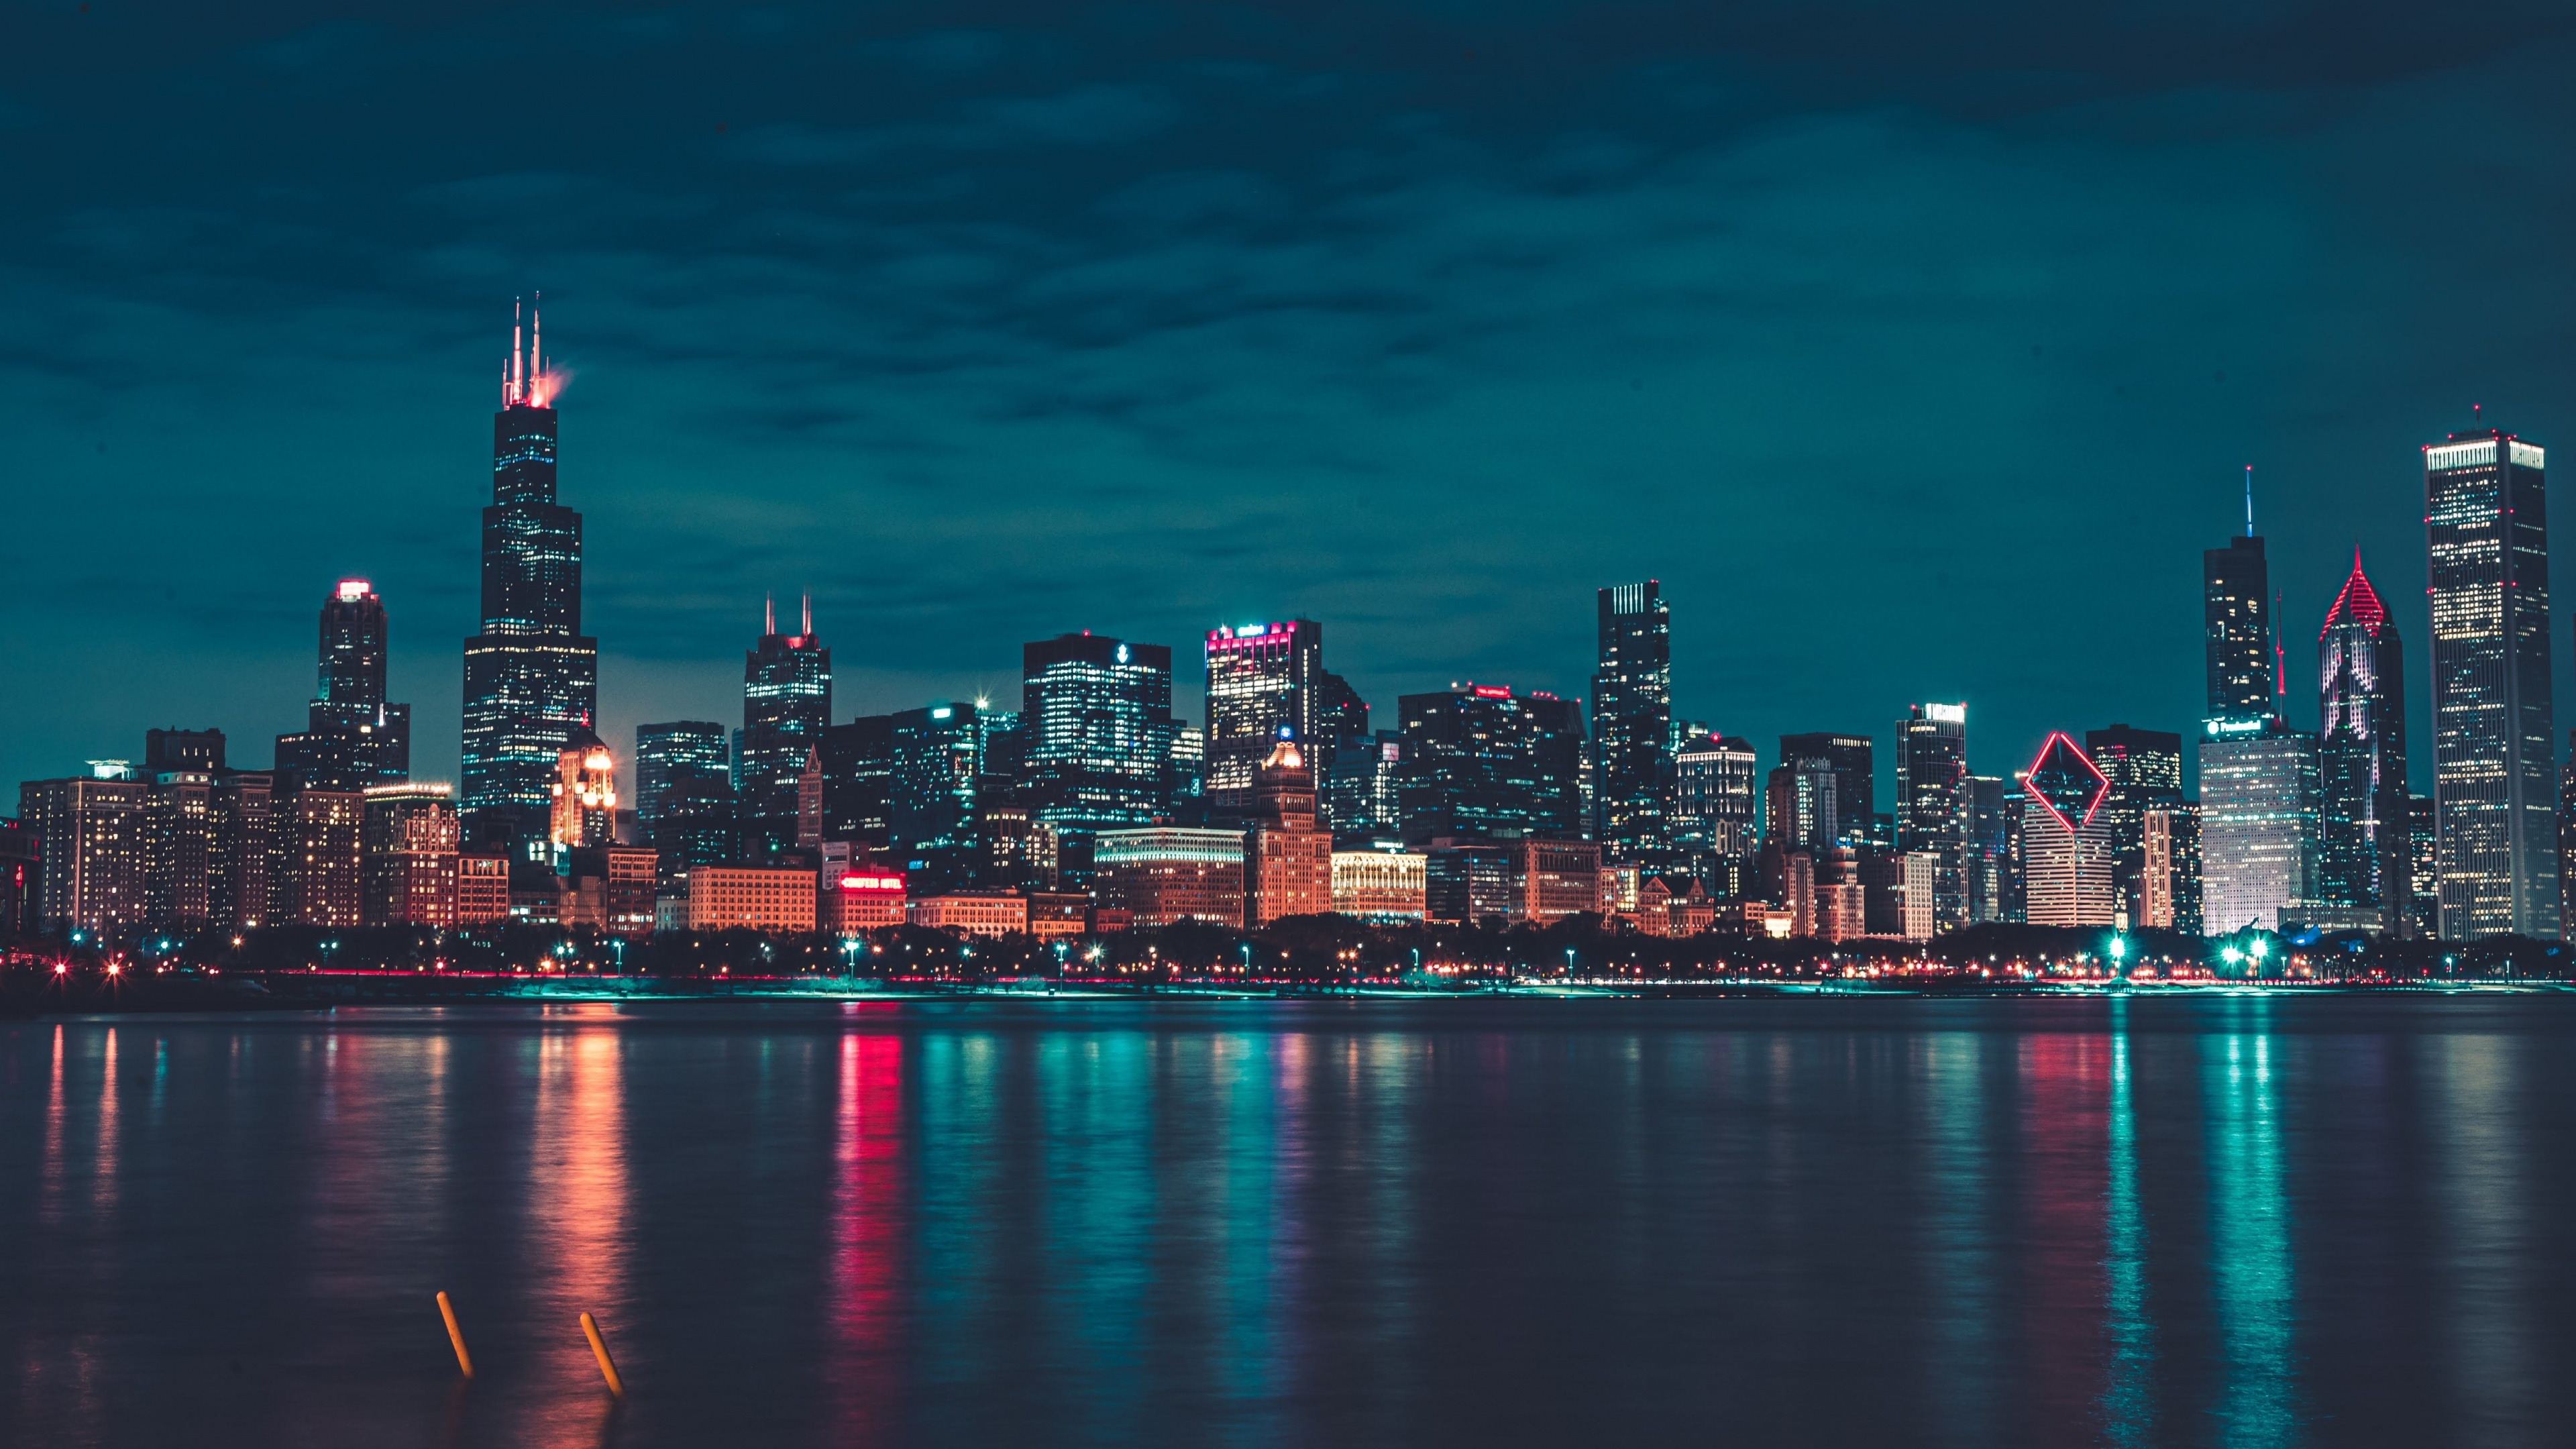 Chicago: City lights, Cityscape, The seat of Cook County. 3840x2160 4K Wallpaper.